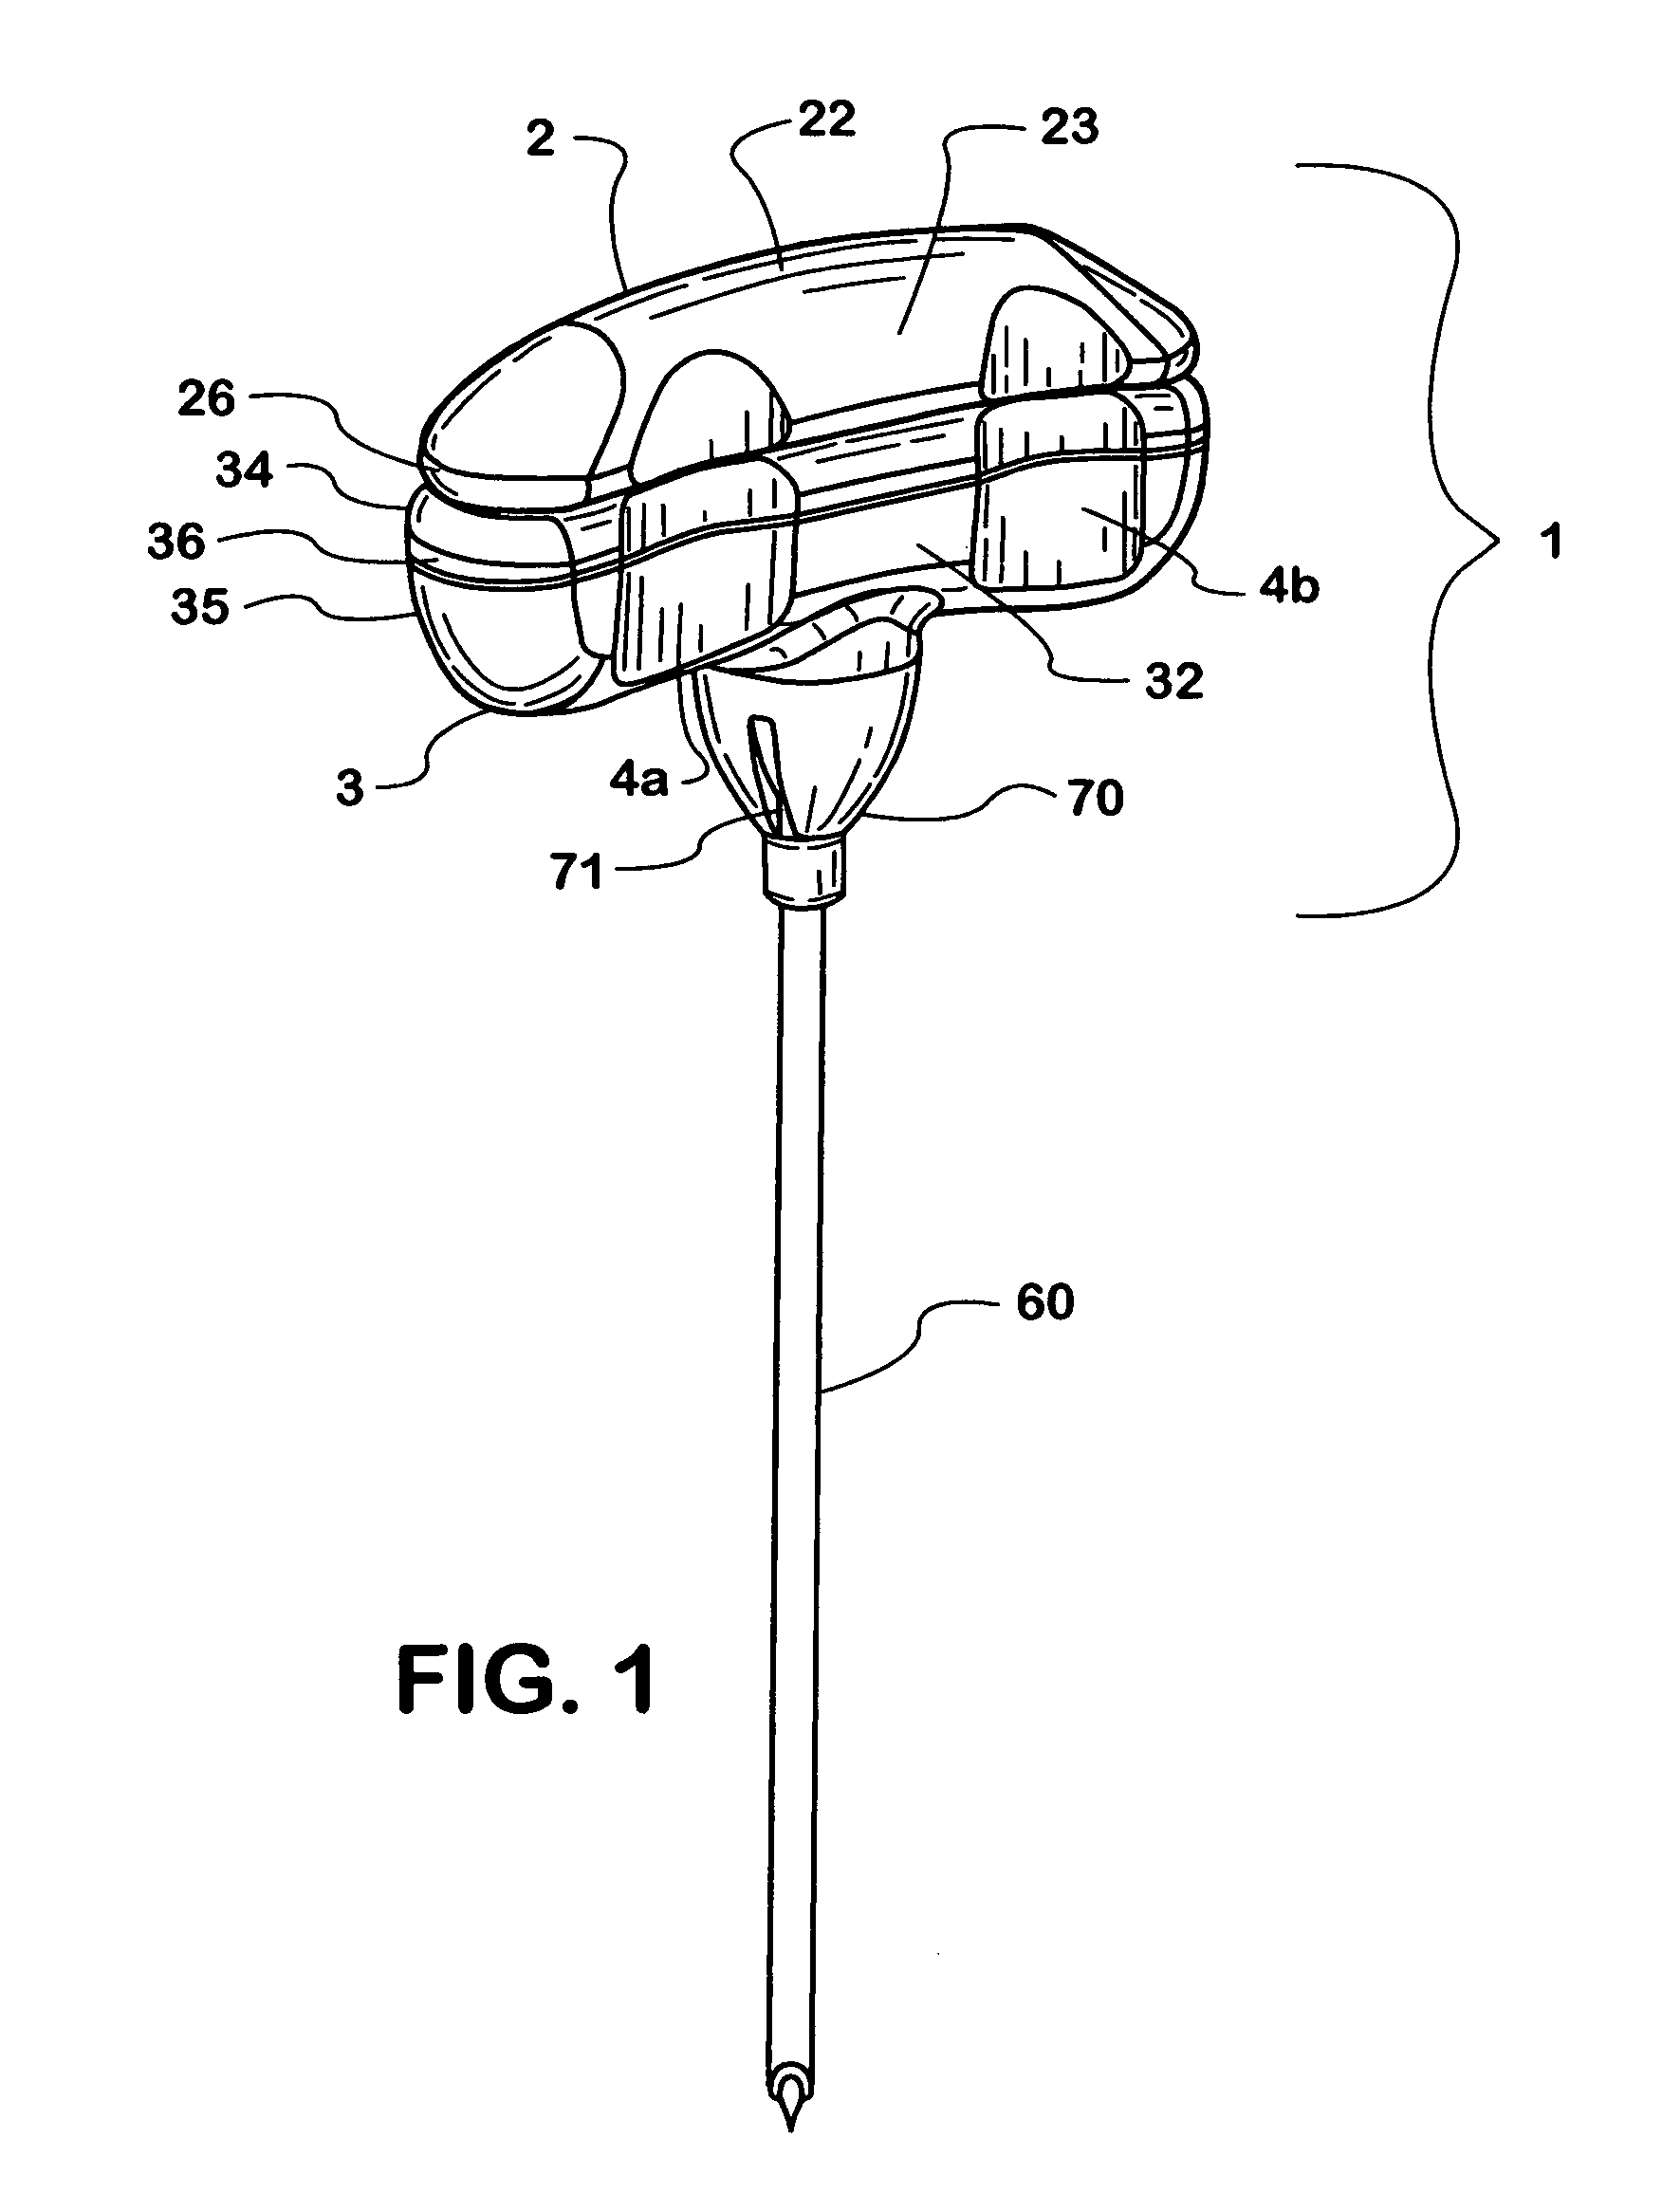 Biopsy device handle assembly